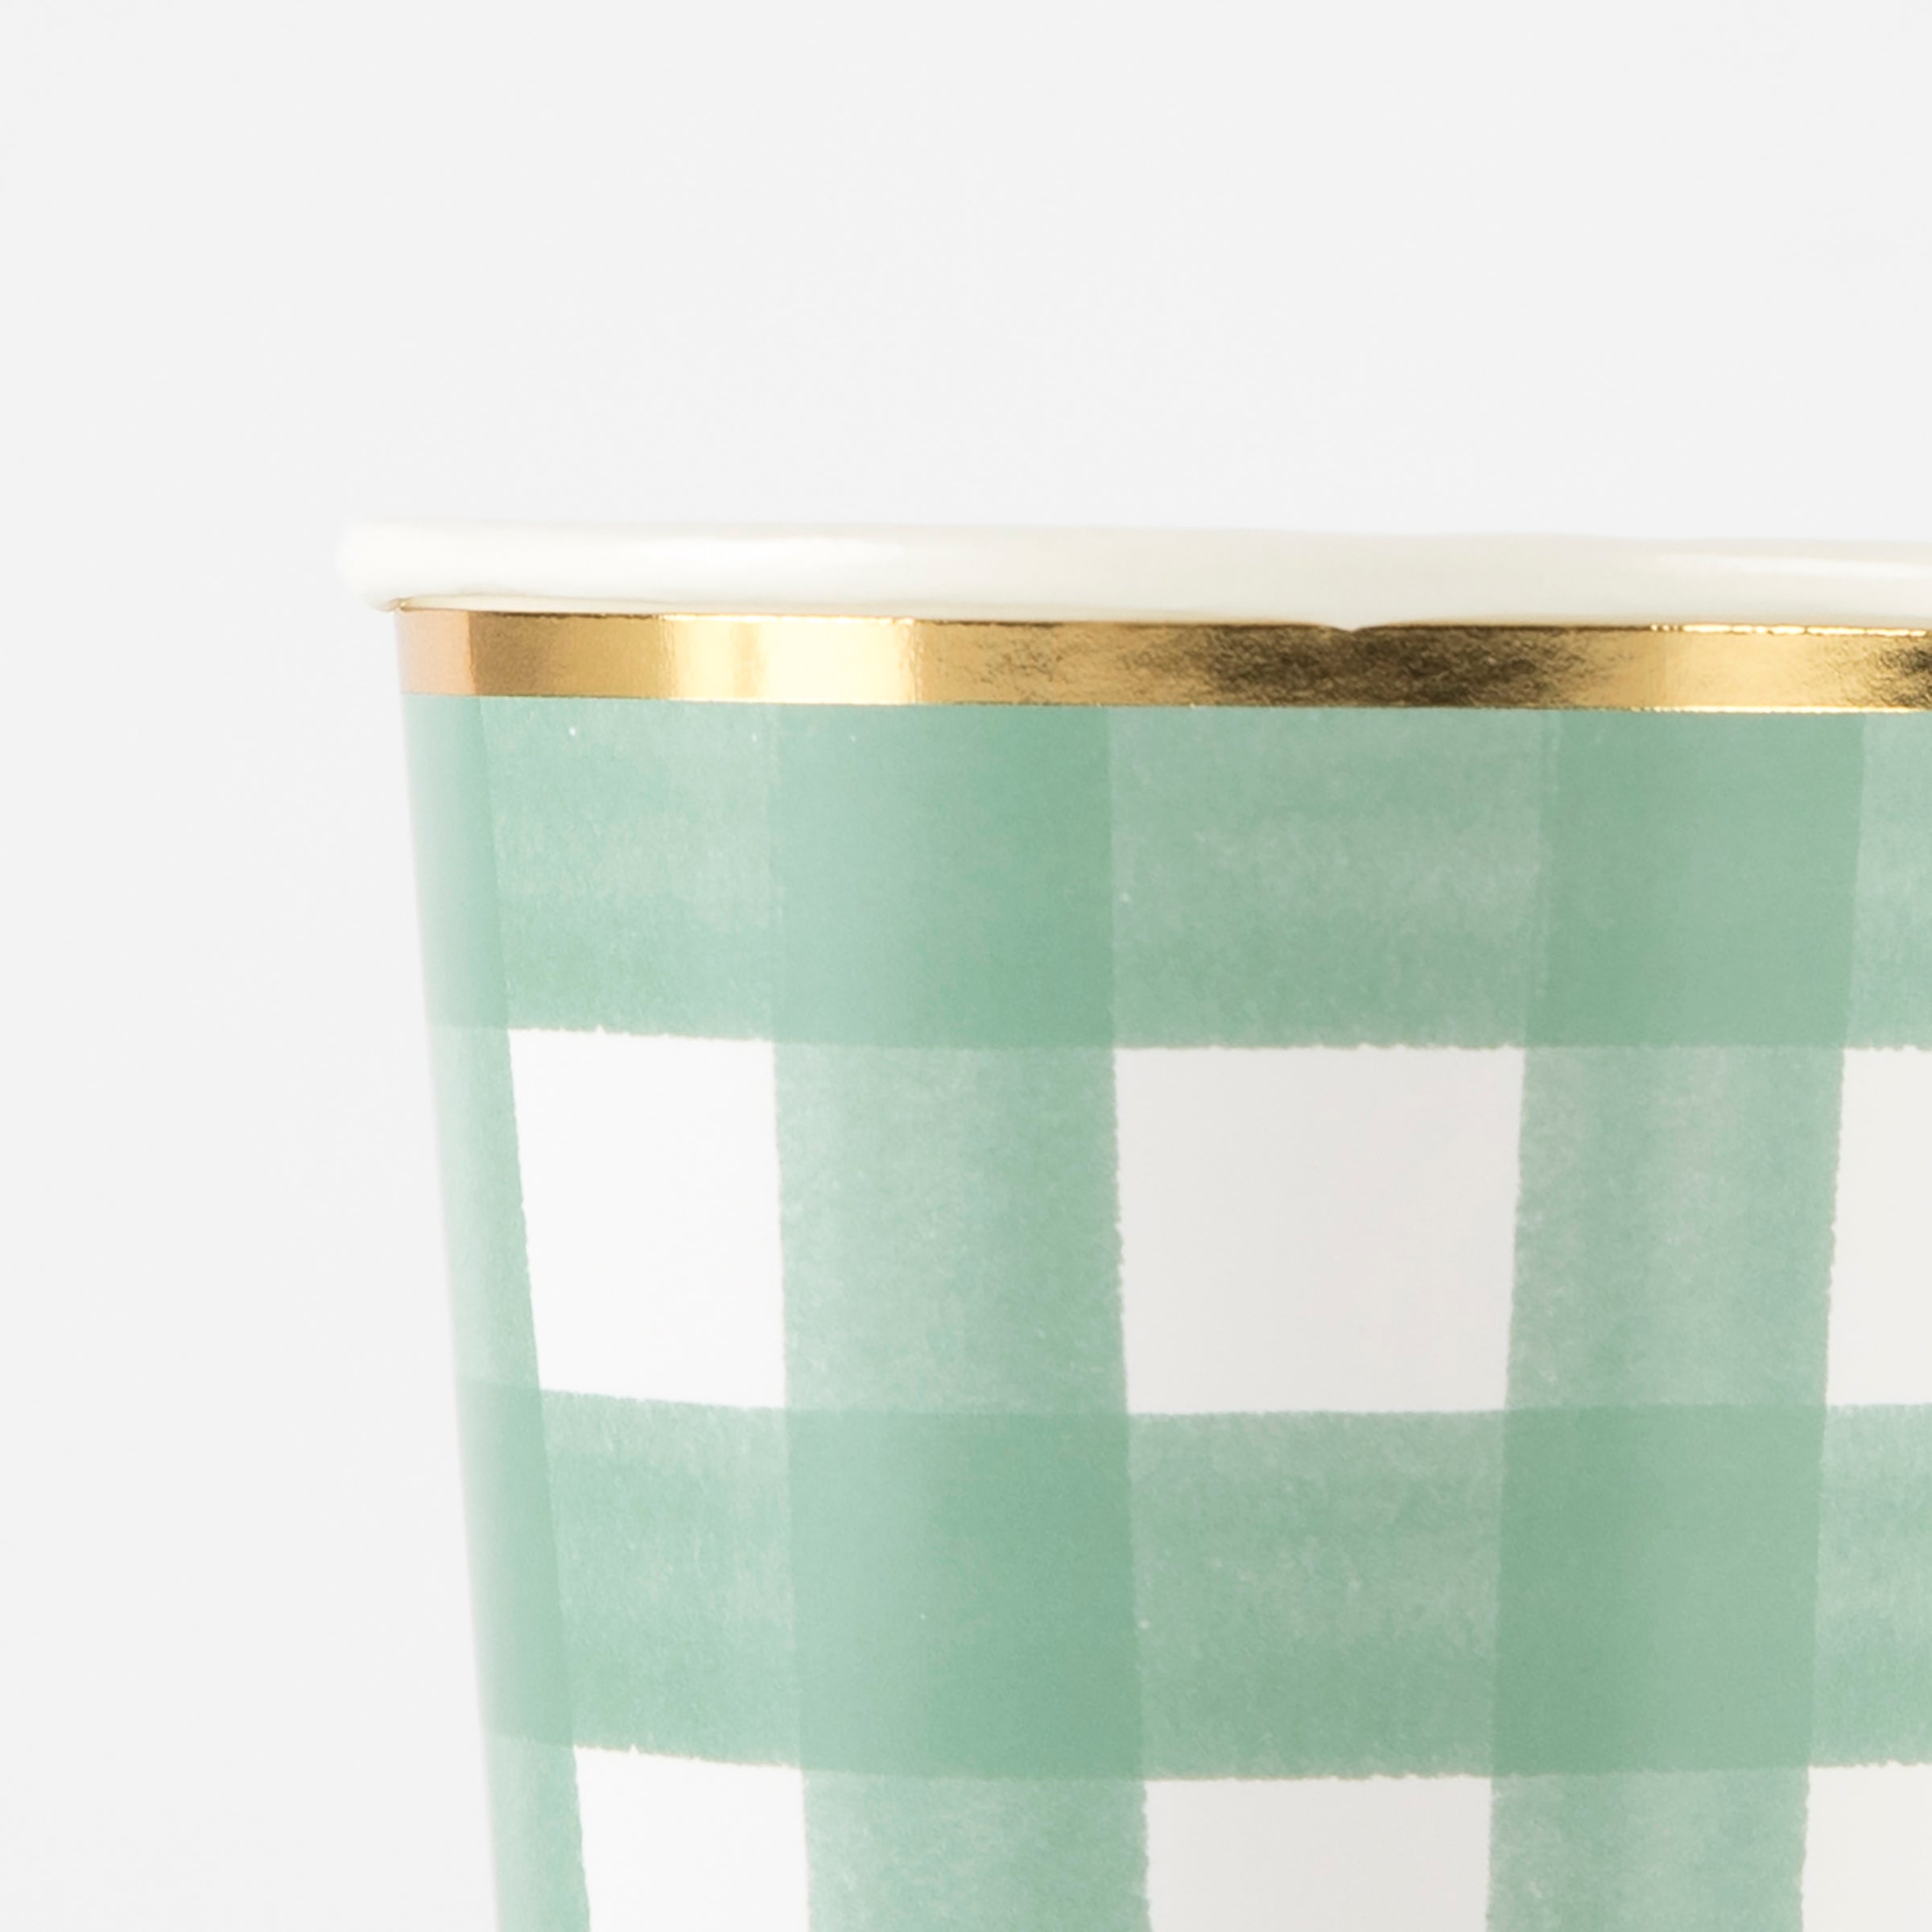 The green gingham pattern of these party cups is complemented with a shiny gold foil border.